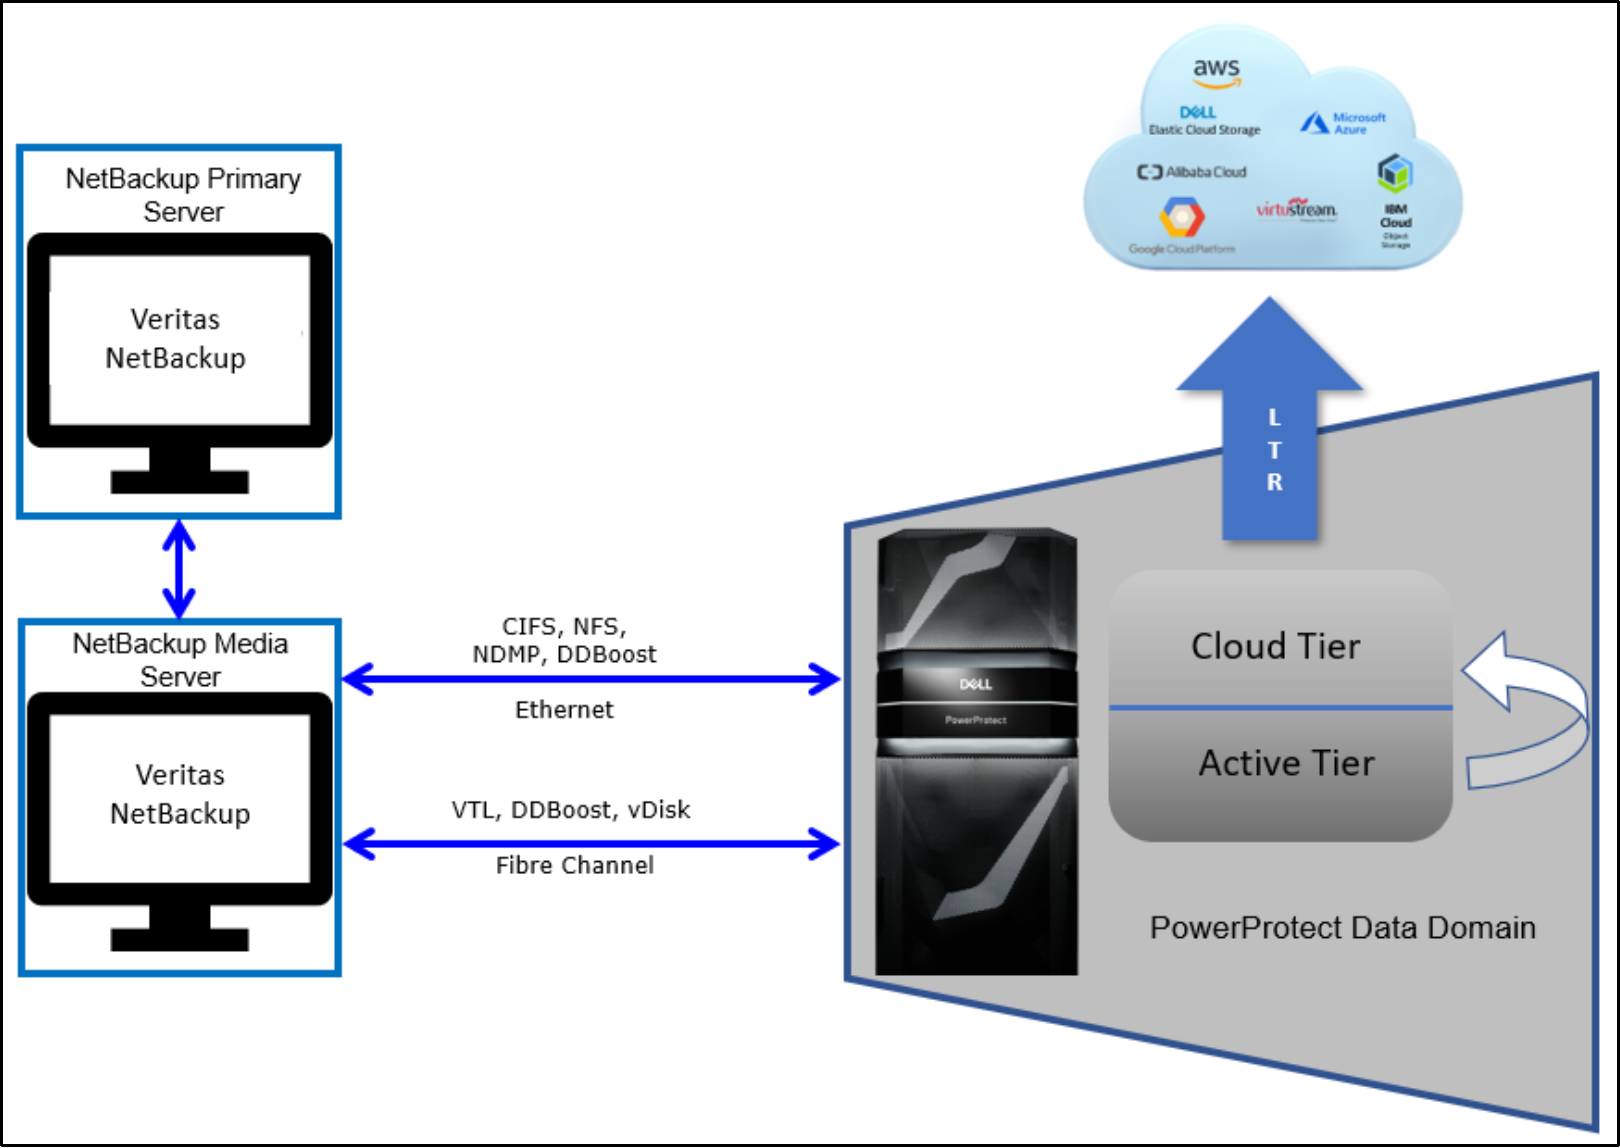 This image shows the overview of Cloud Tier with NetBackup